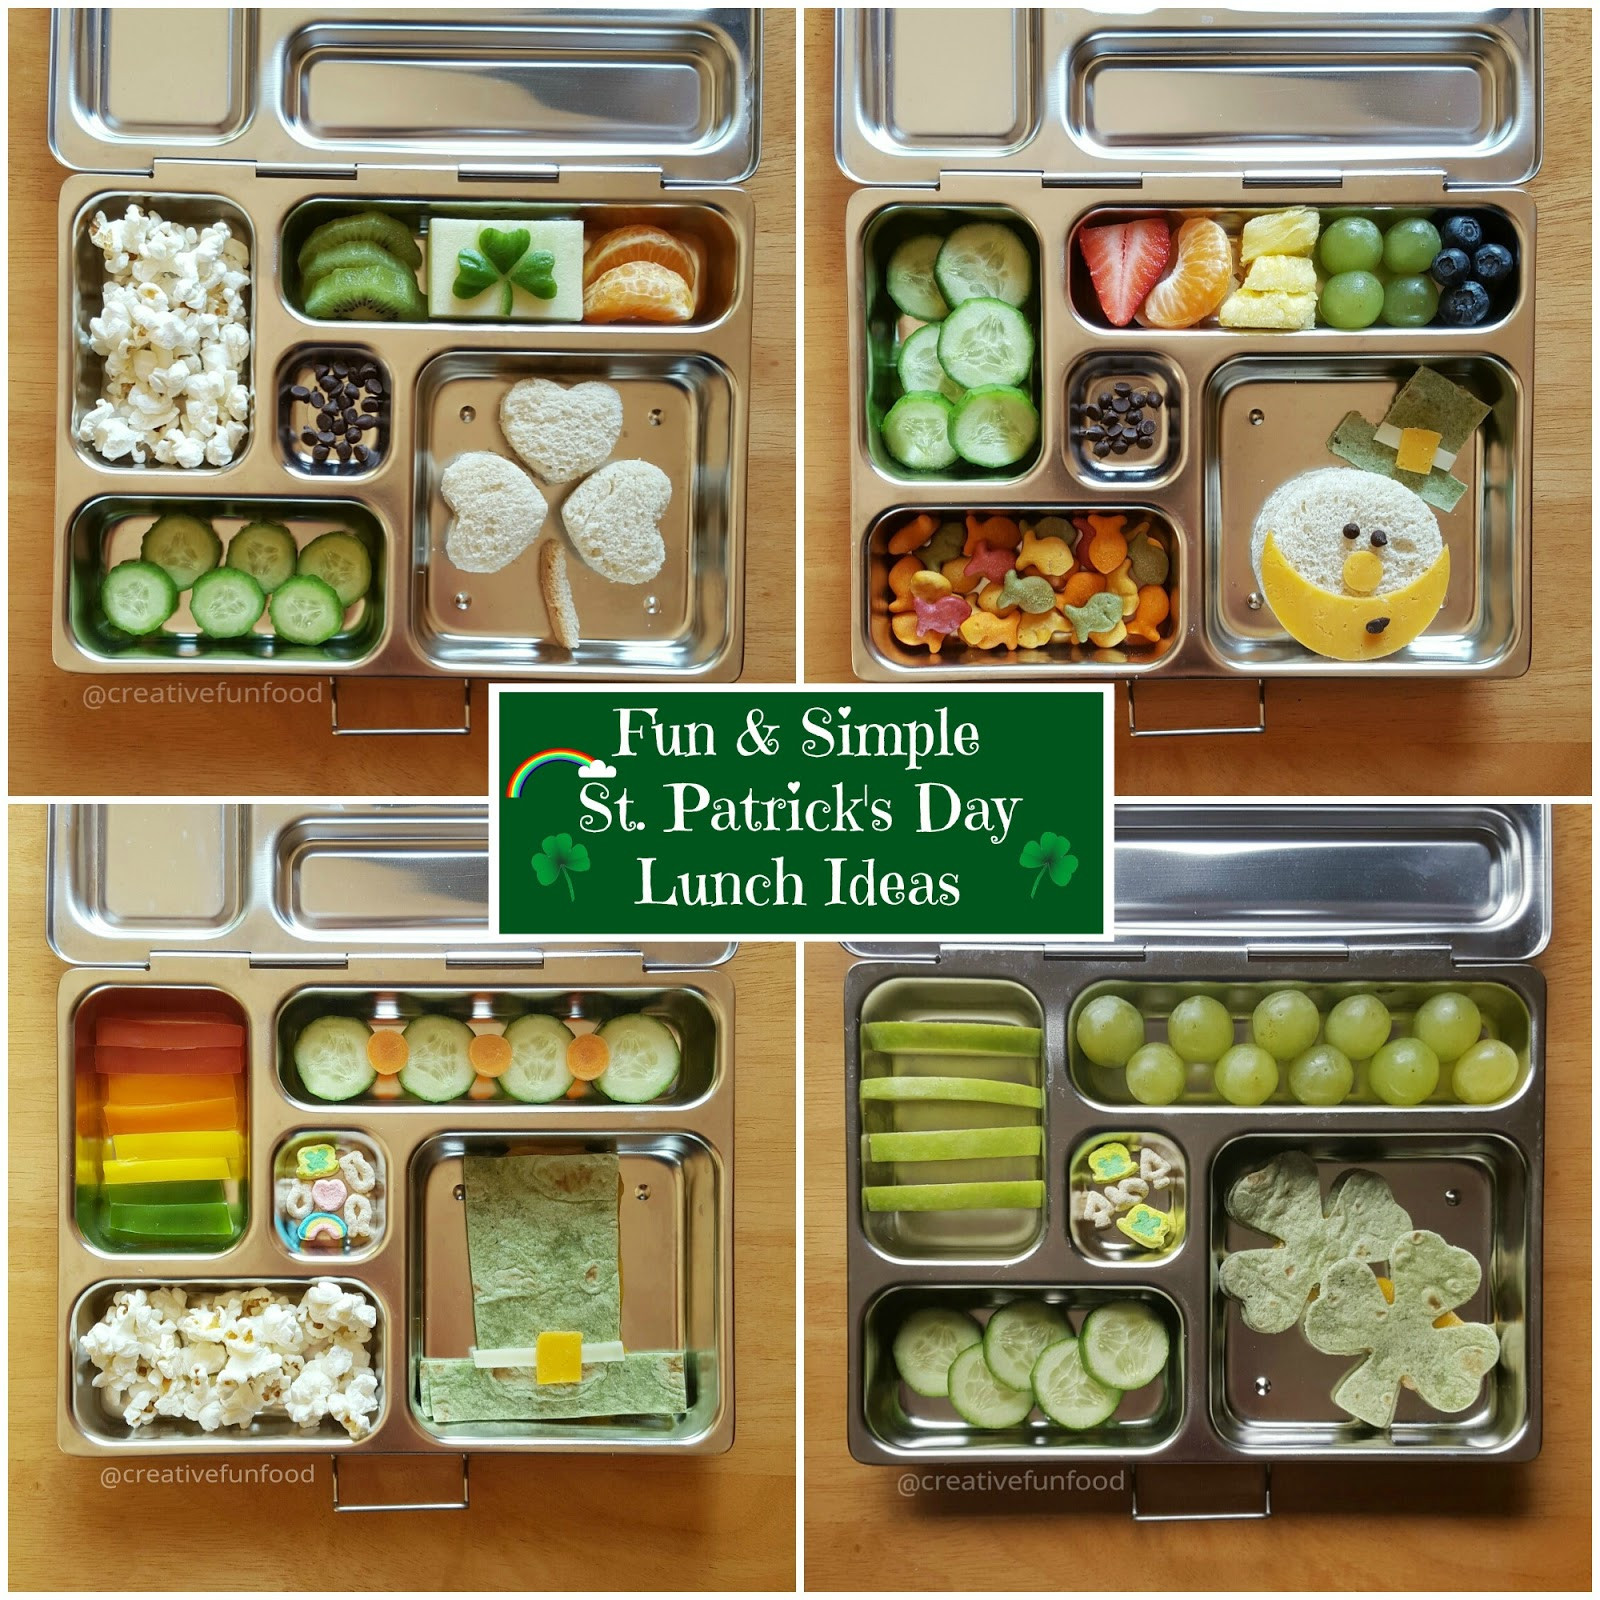 St Patrick's Day Lunch Ideas
 Creative Food